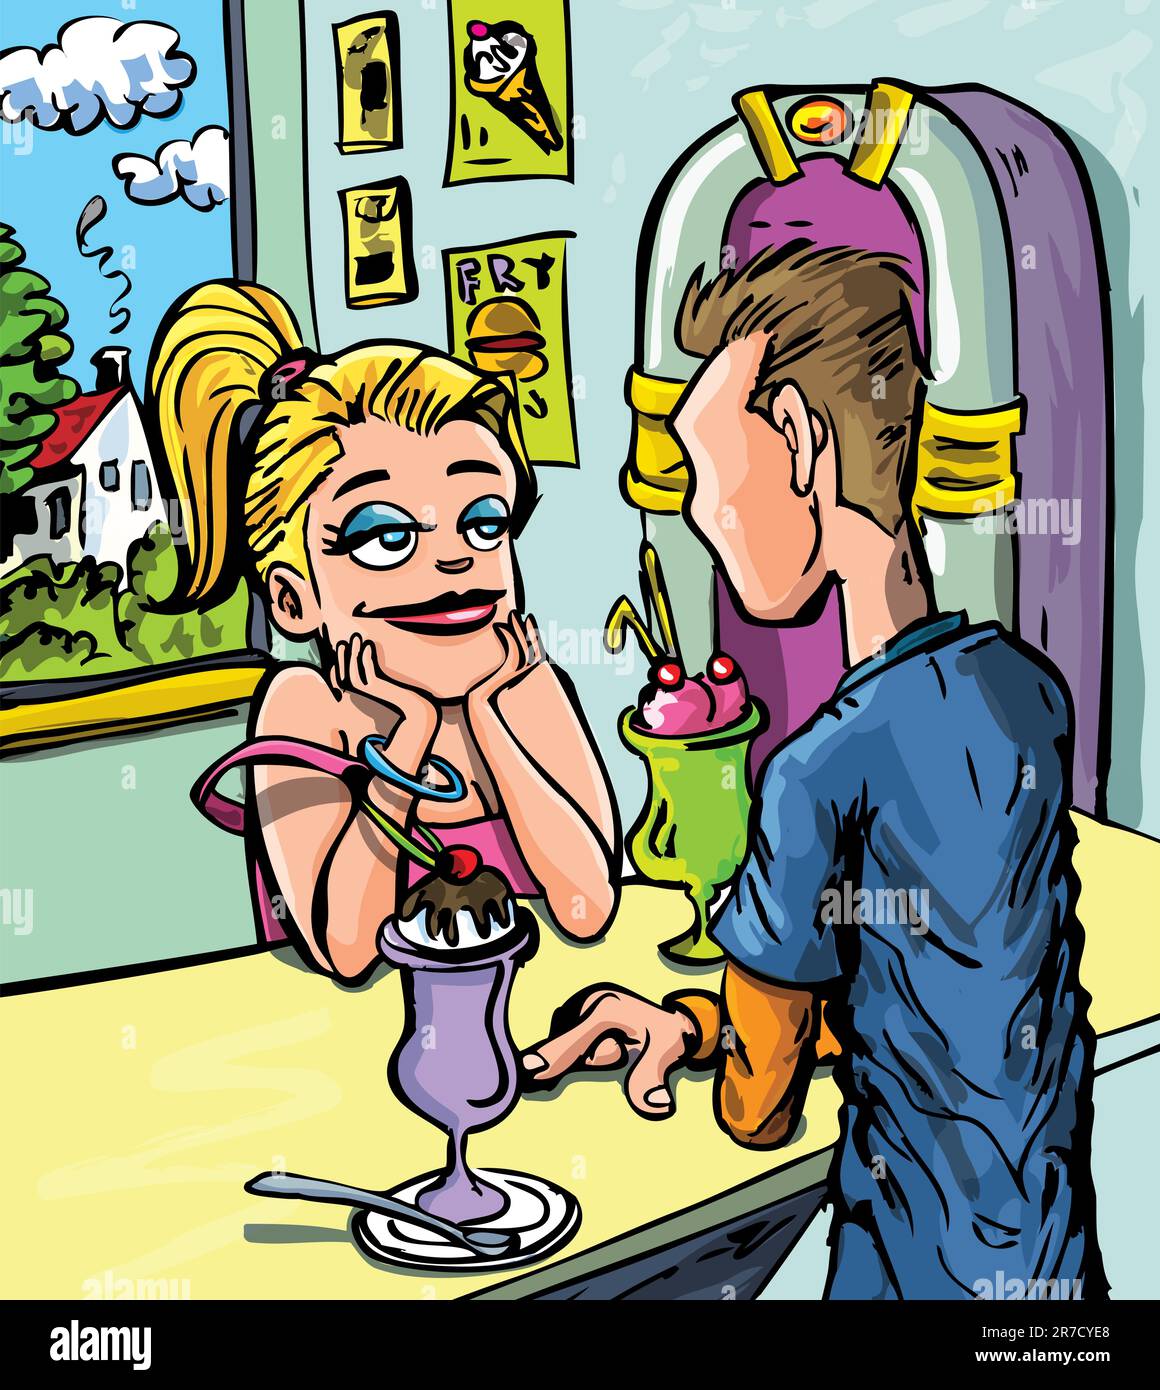 Cartoon of boy and girl on a date in a Soda shop Stock Vector